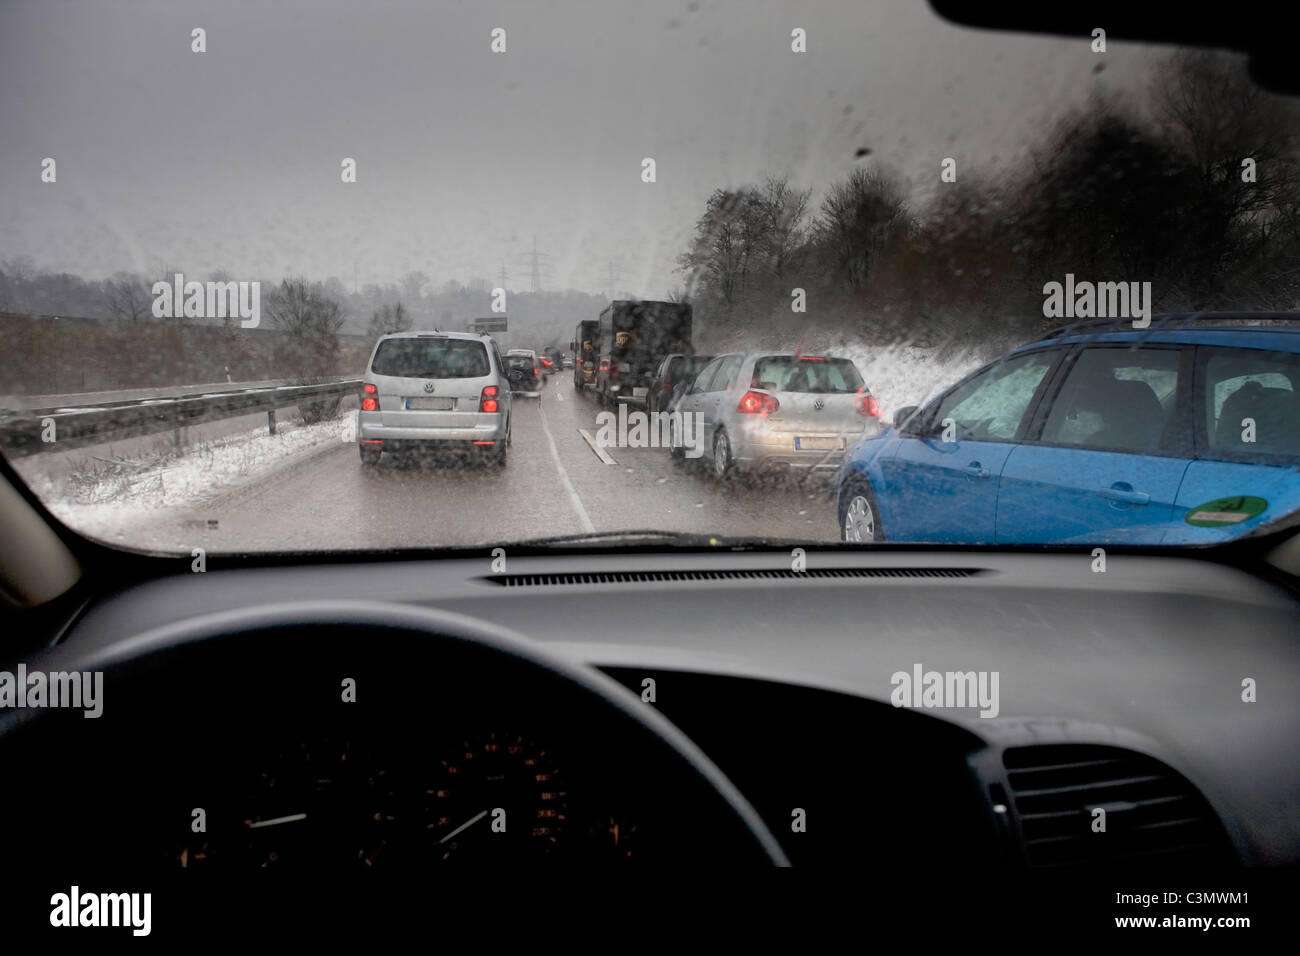 traffic jam on a main road in southern Germany, dirty winterly weather Stock Photo